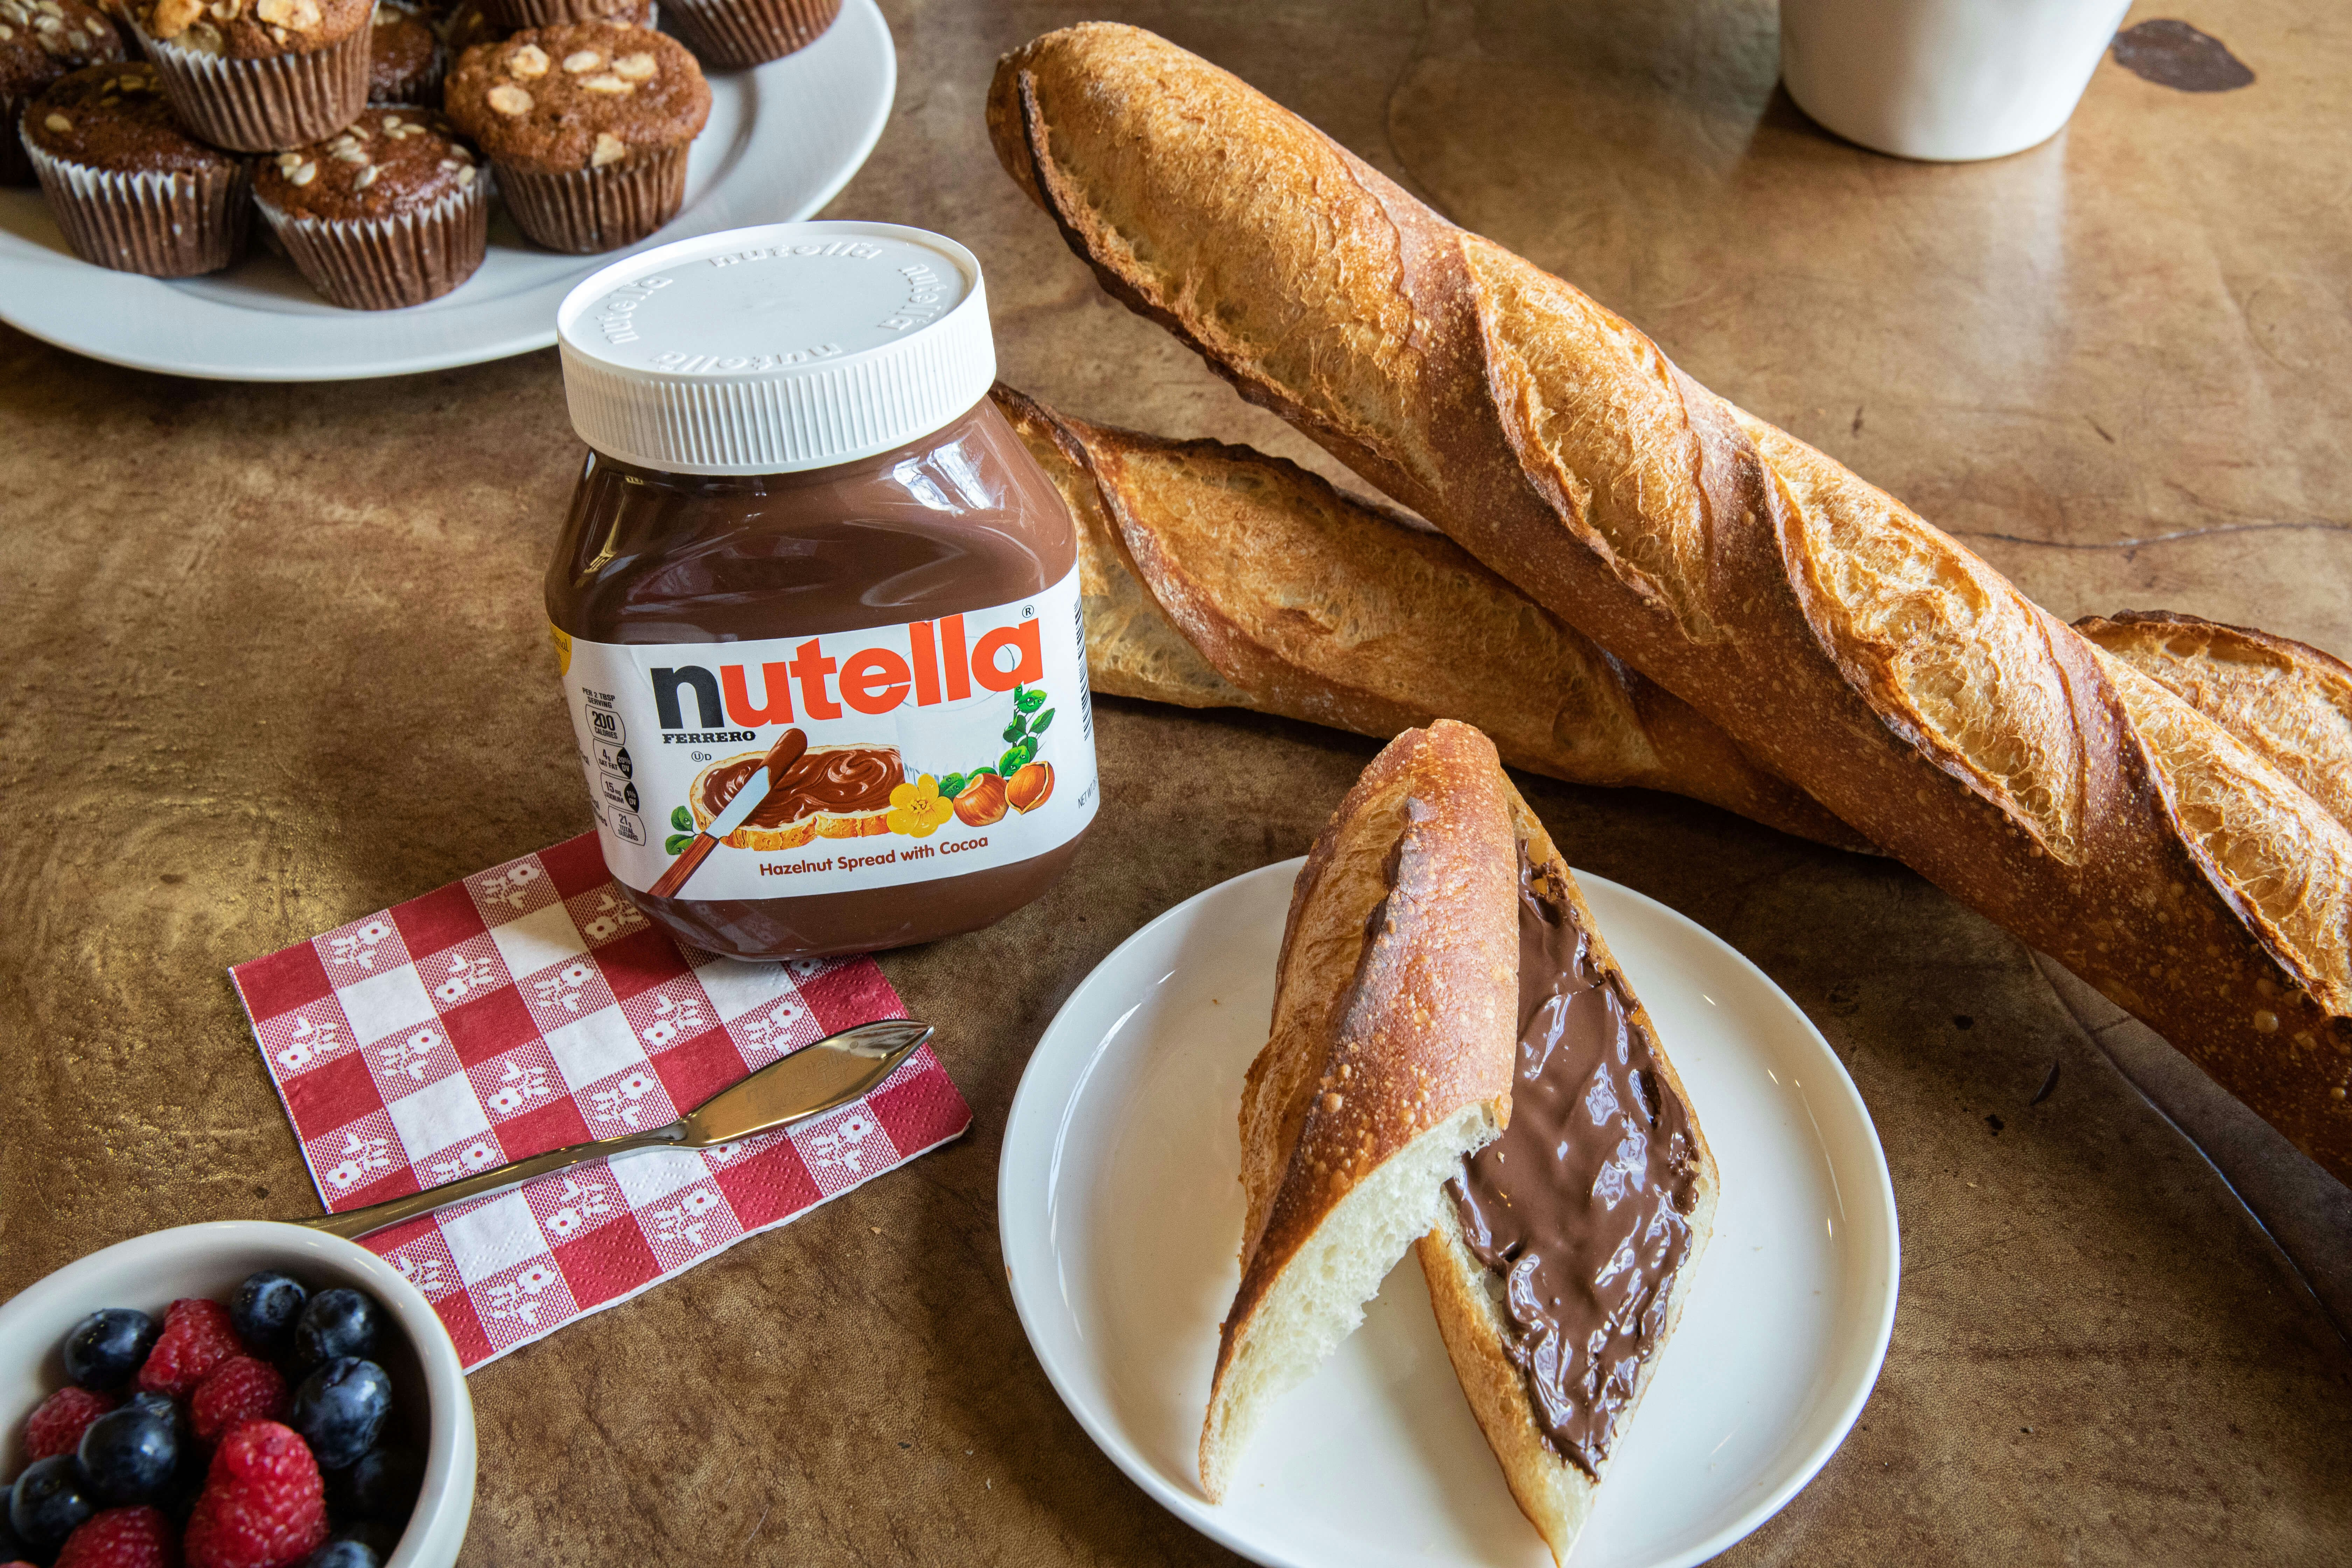 A table with a jar of Nutella, two baguettes, and slices of bread with Nutella 